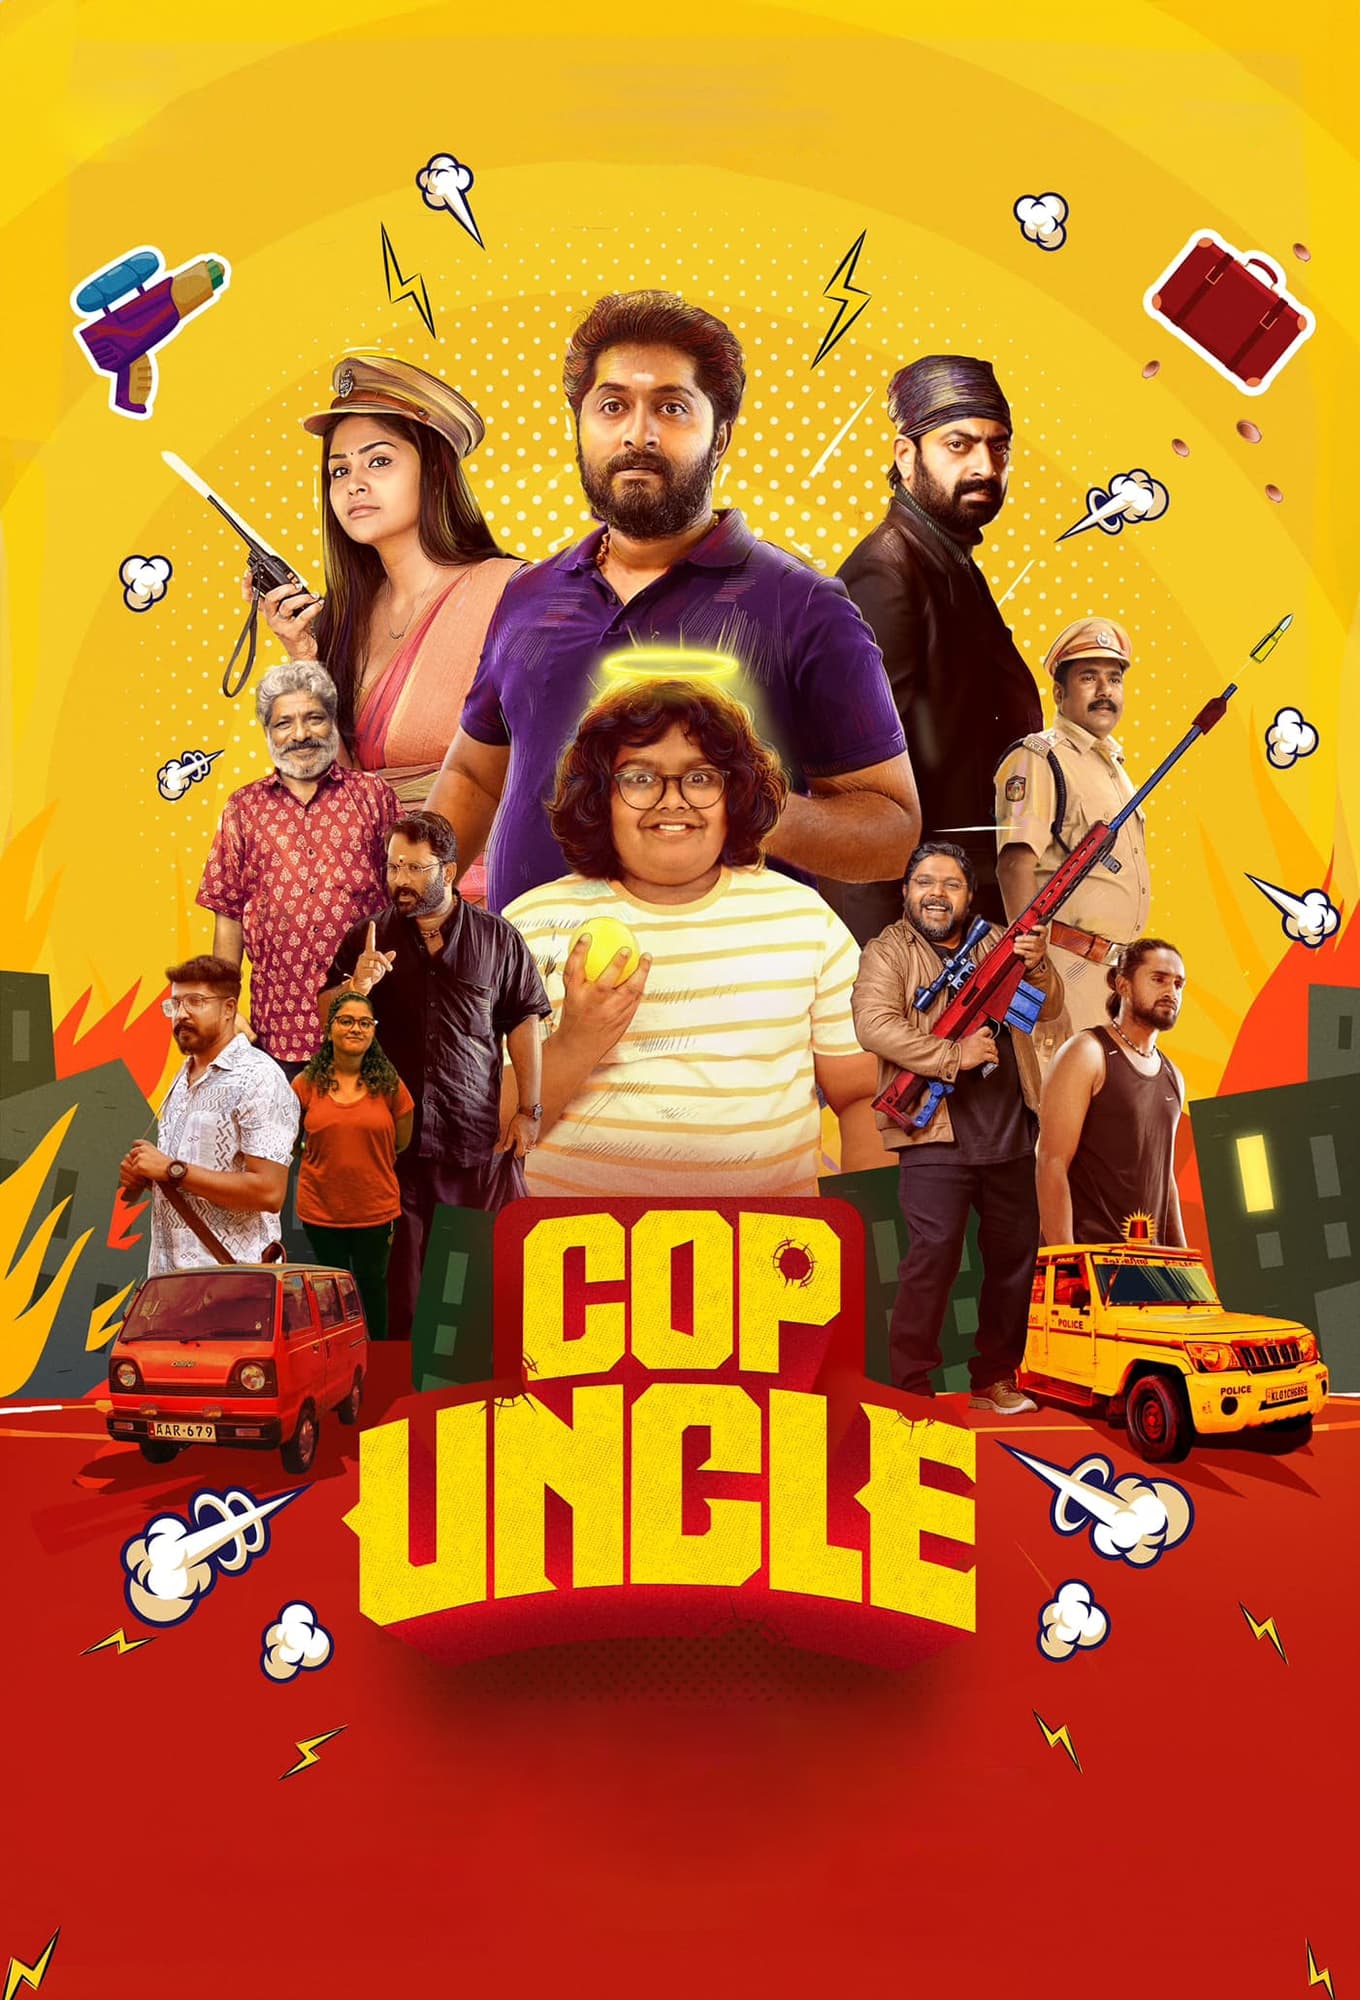 Poster for the movie "Cop Uncle"